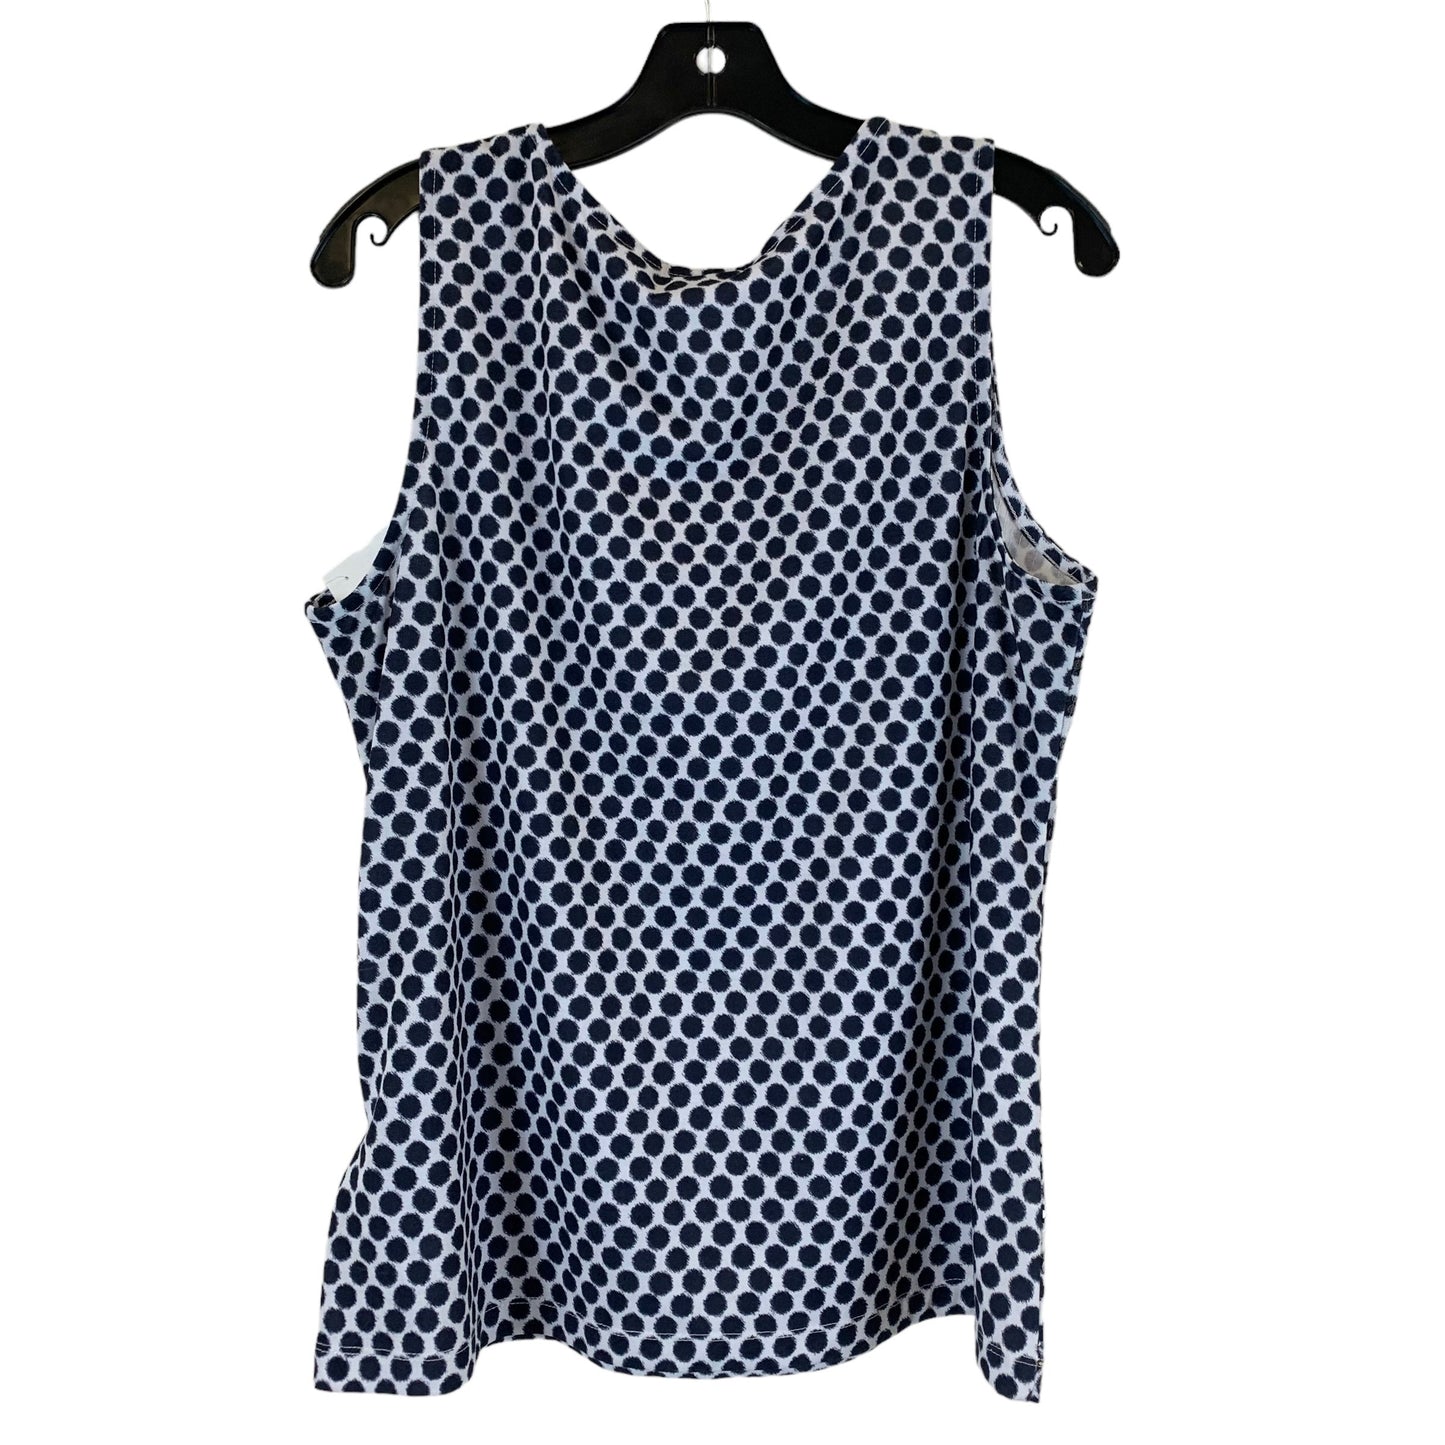 Top Sleeveless By Zenergy By Chicos  Size: L